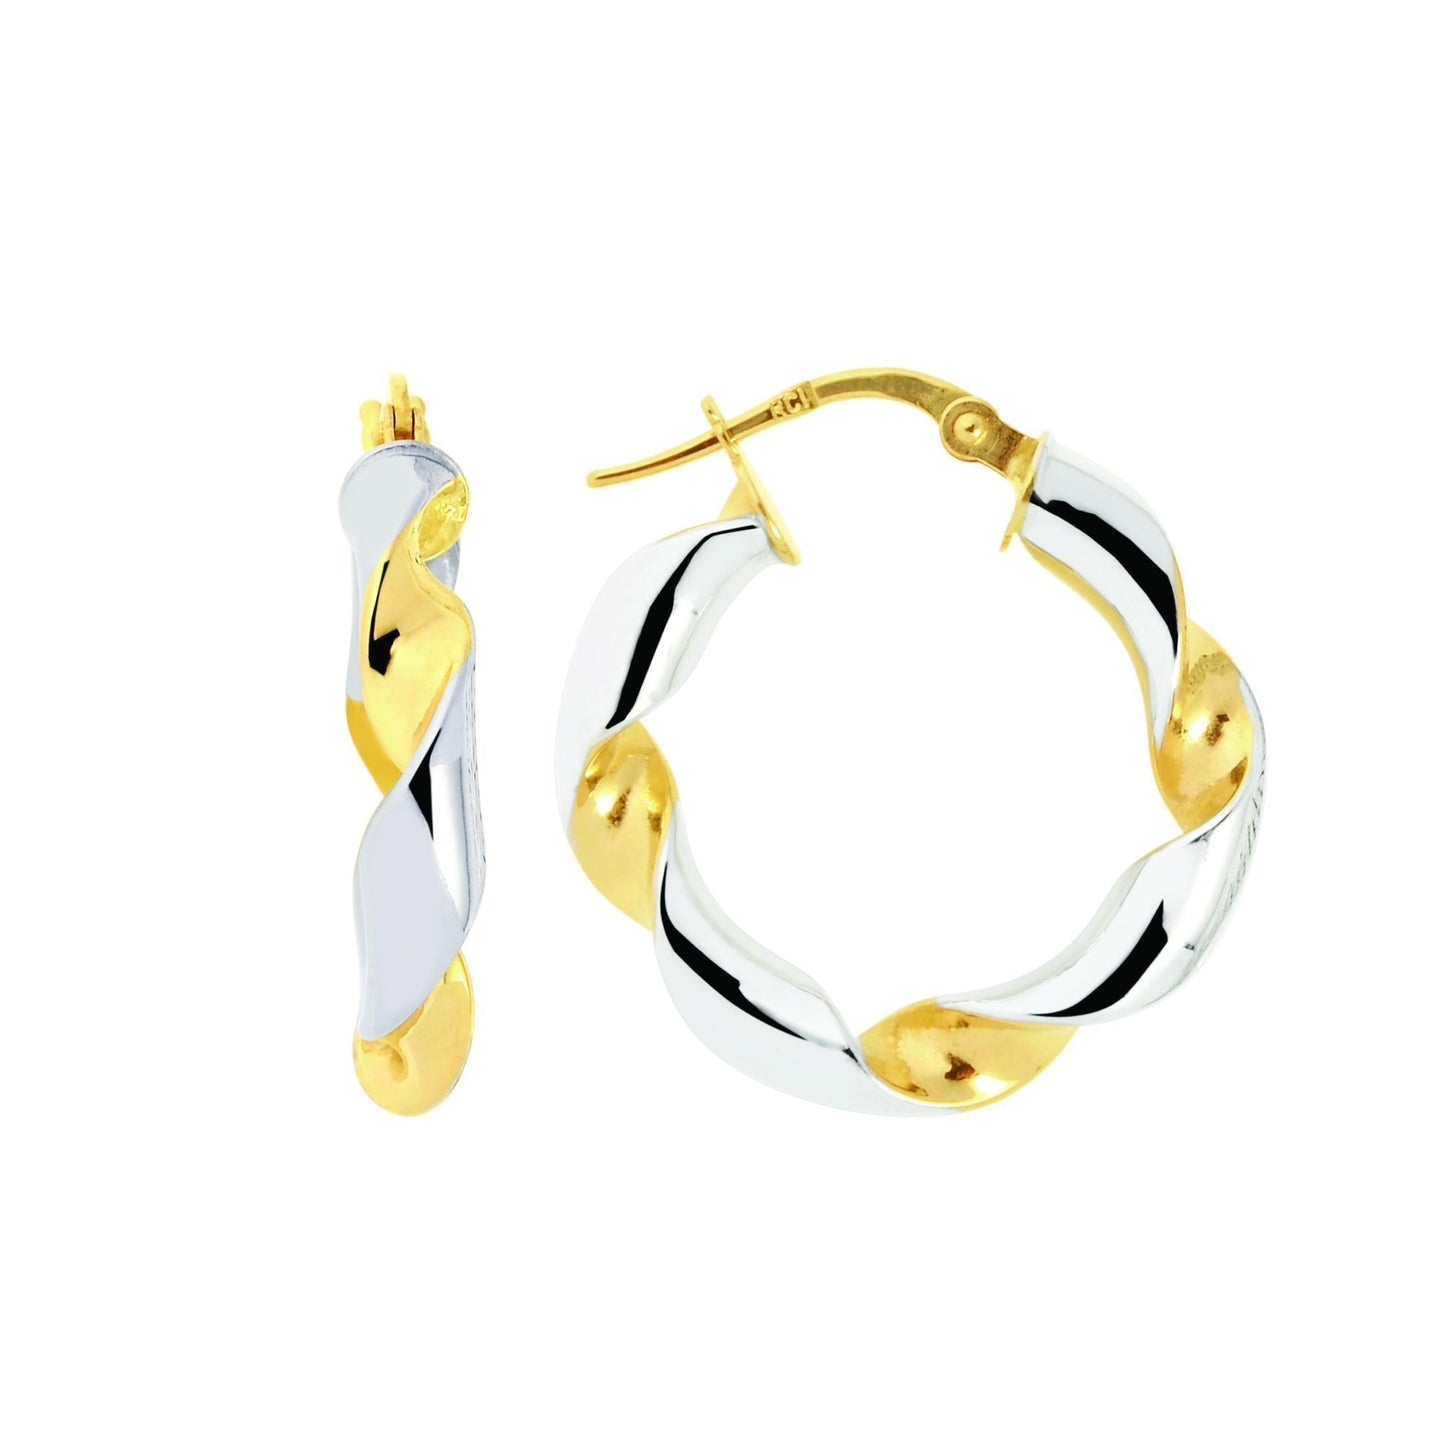 14K Yellow+White Gold Shiny Round Two Tone Twisted Small Hoop Earring with Hinged Clasp